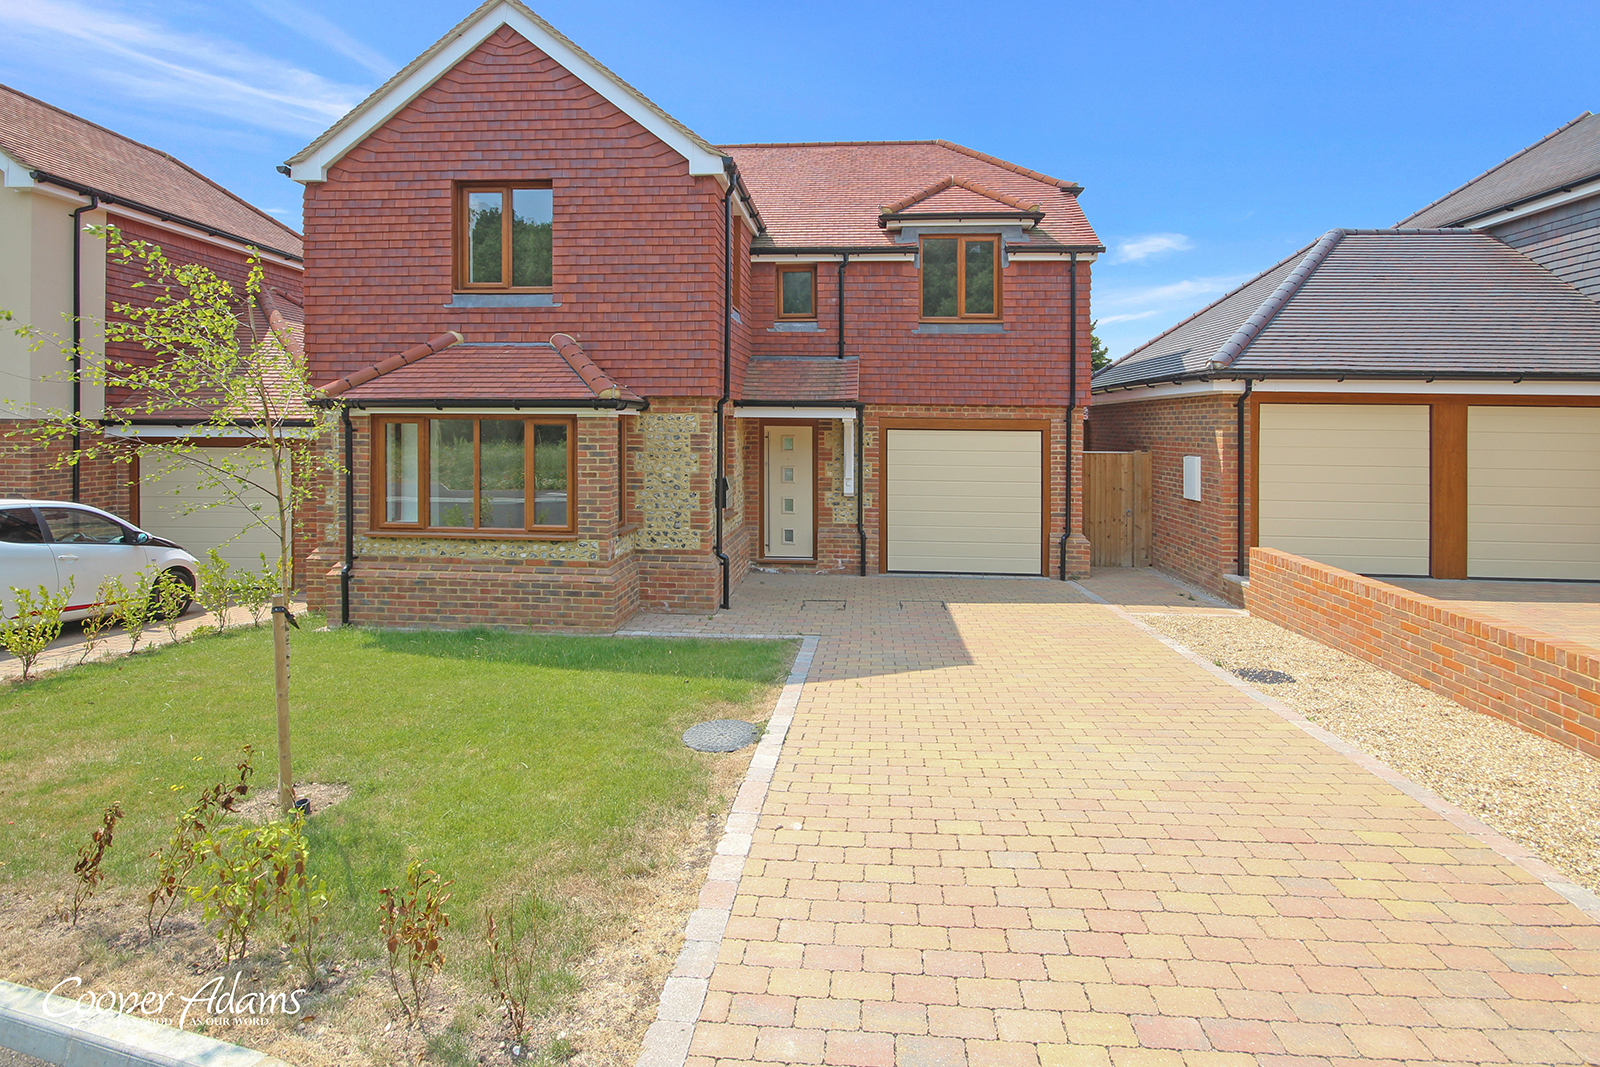 4 bed house for sale in Starling View, Arundel Road, Angmering  - Property Image 1